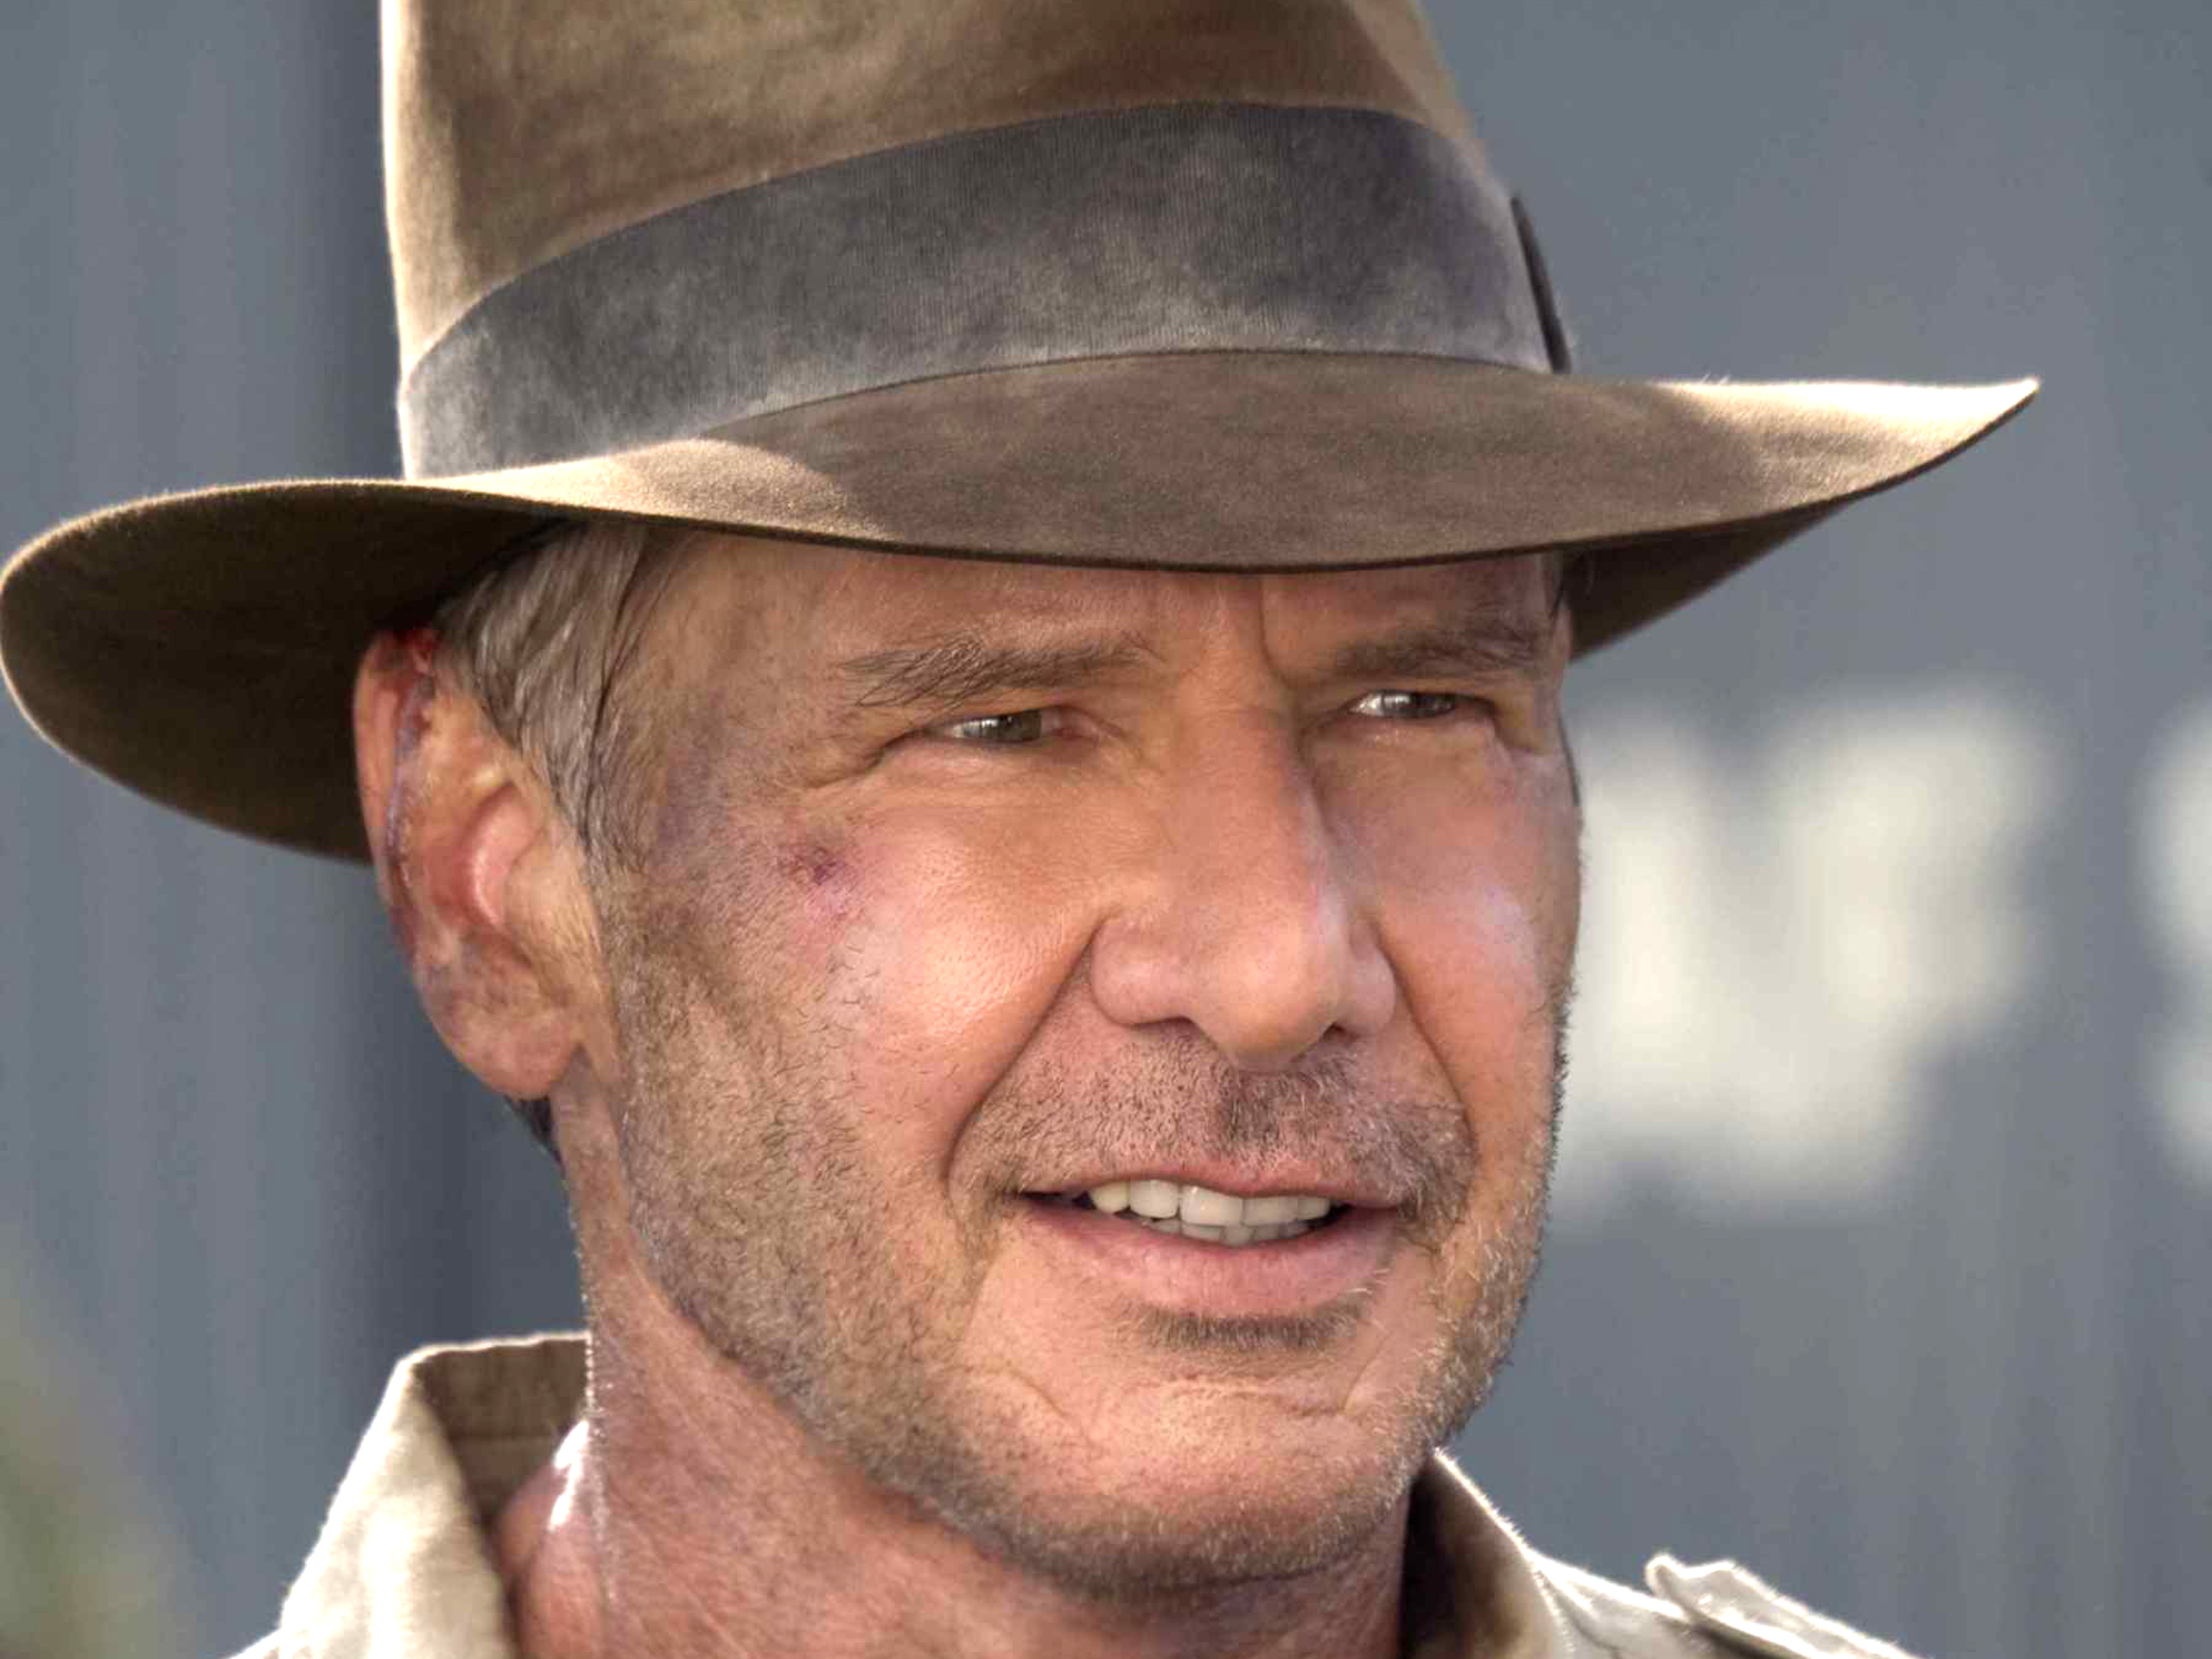 Movie News: Harrison Ford replaces Bruce Willis in The Expendables 3